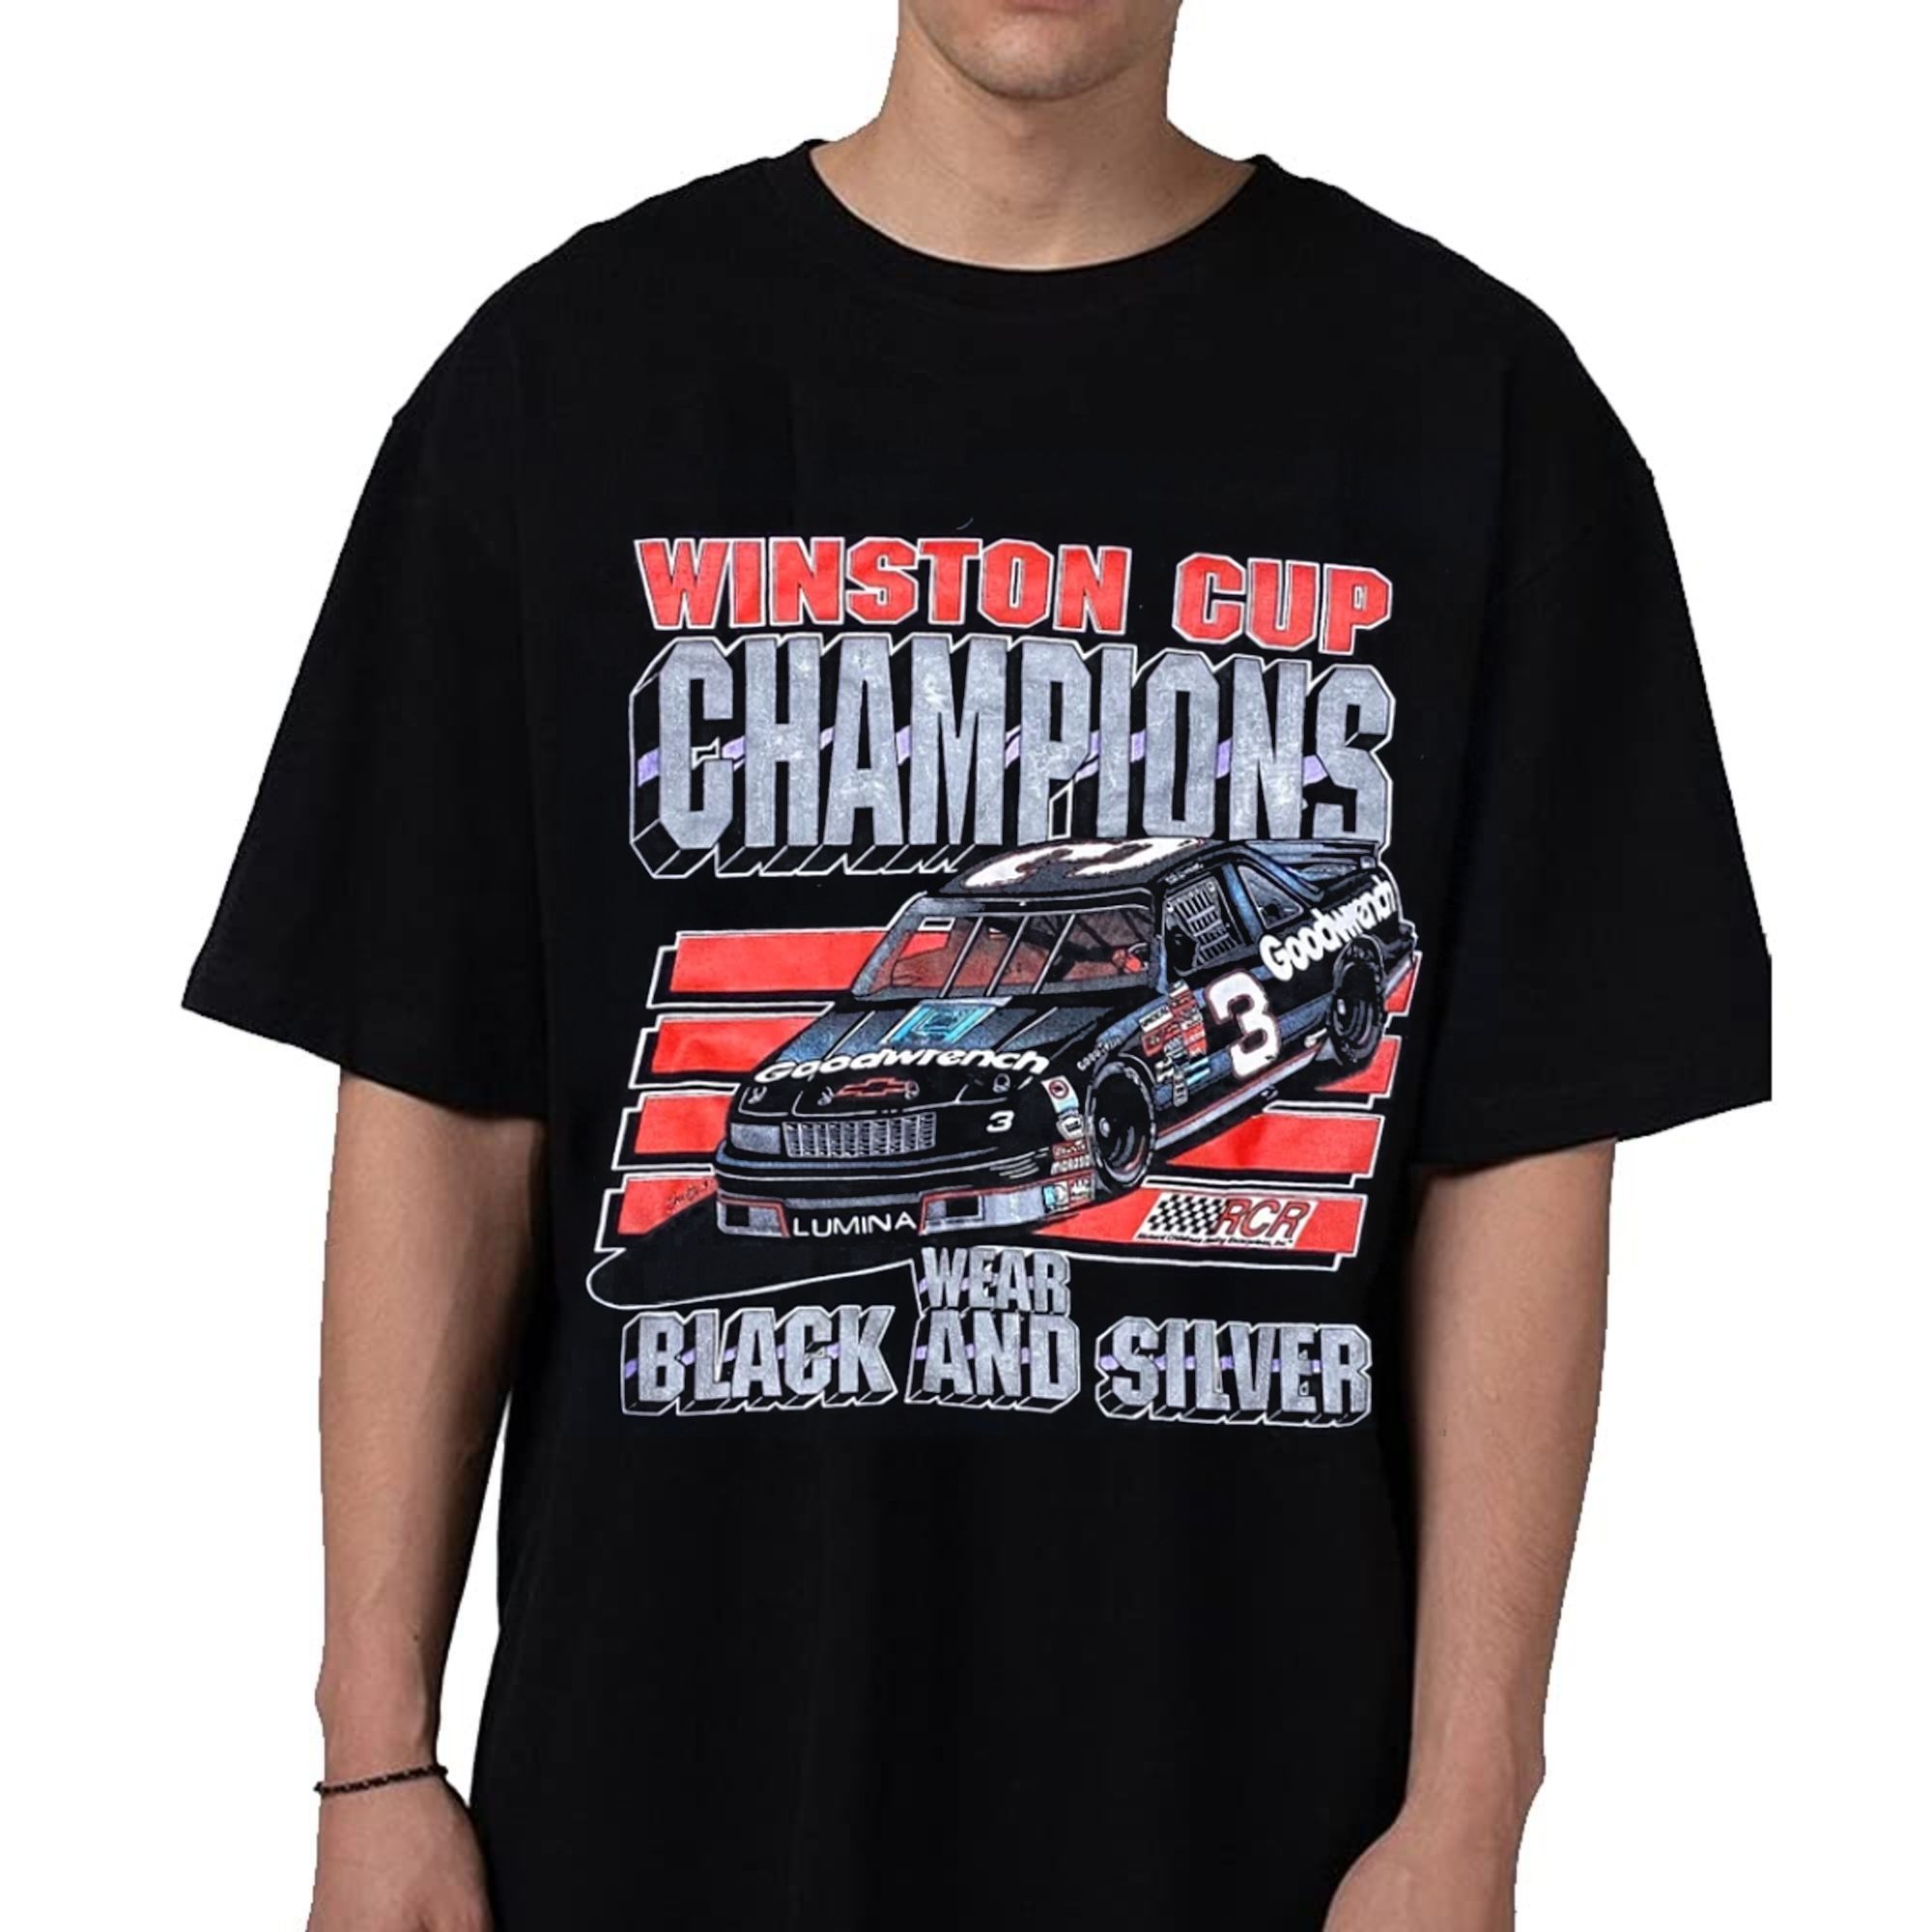 Dale Earnhardt Goodwrench Rock Time Winston Cup Champions Shirt